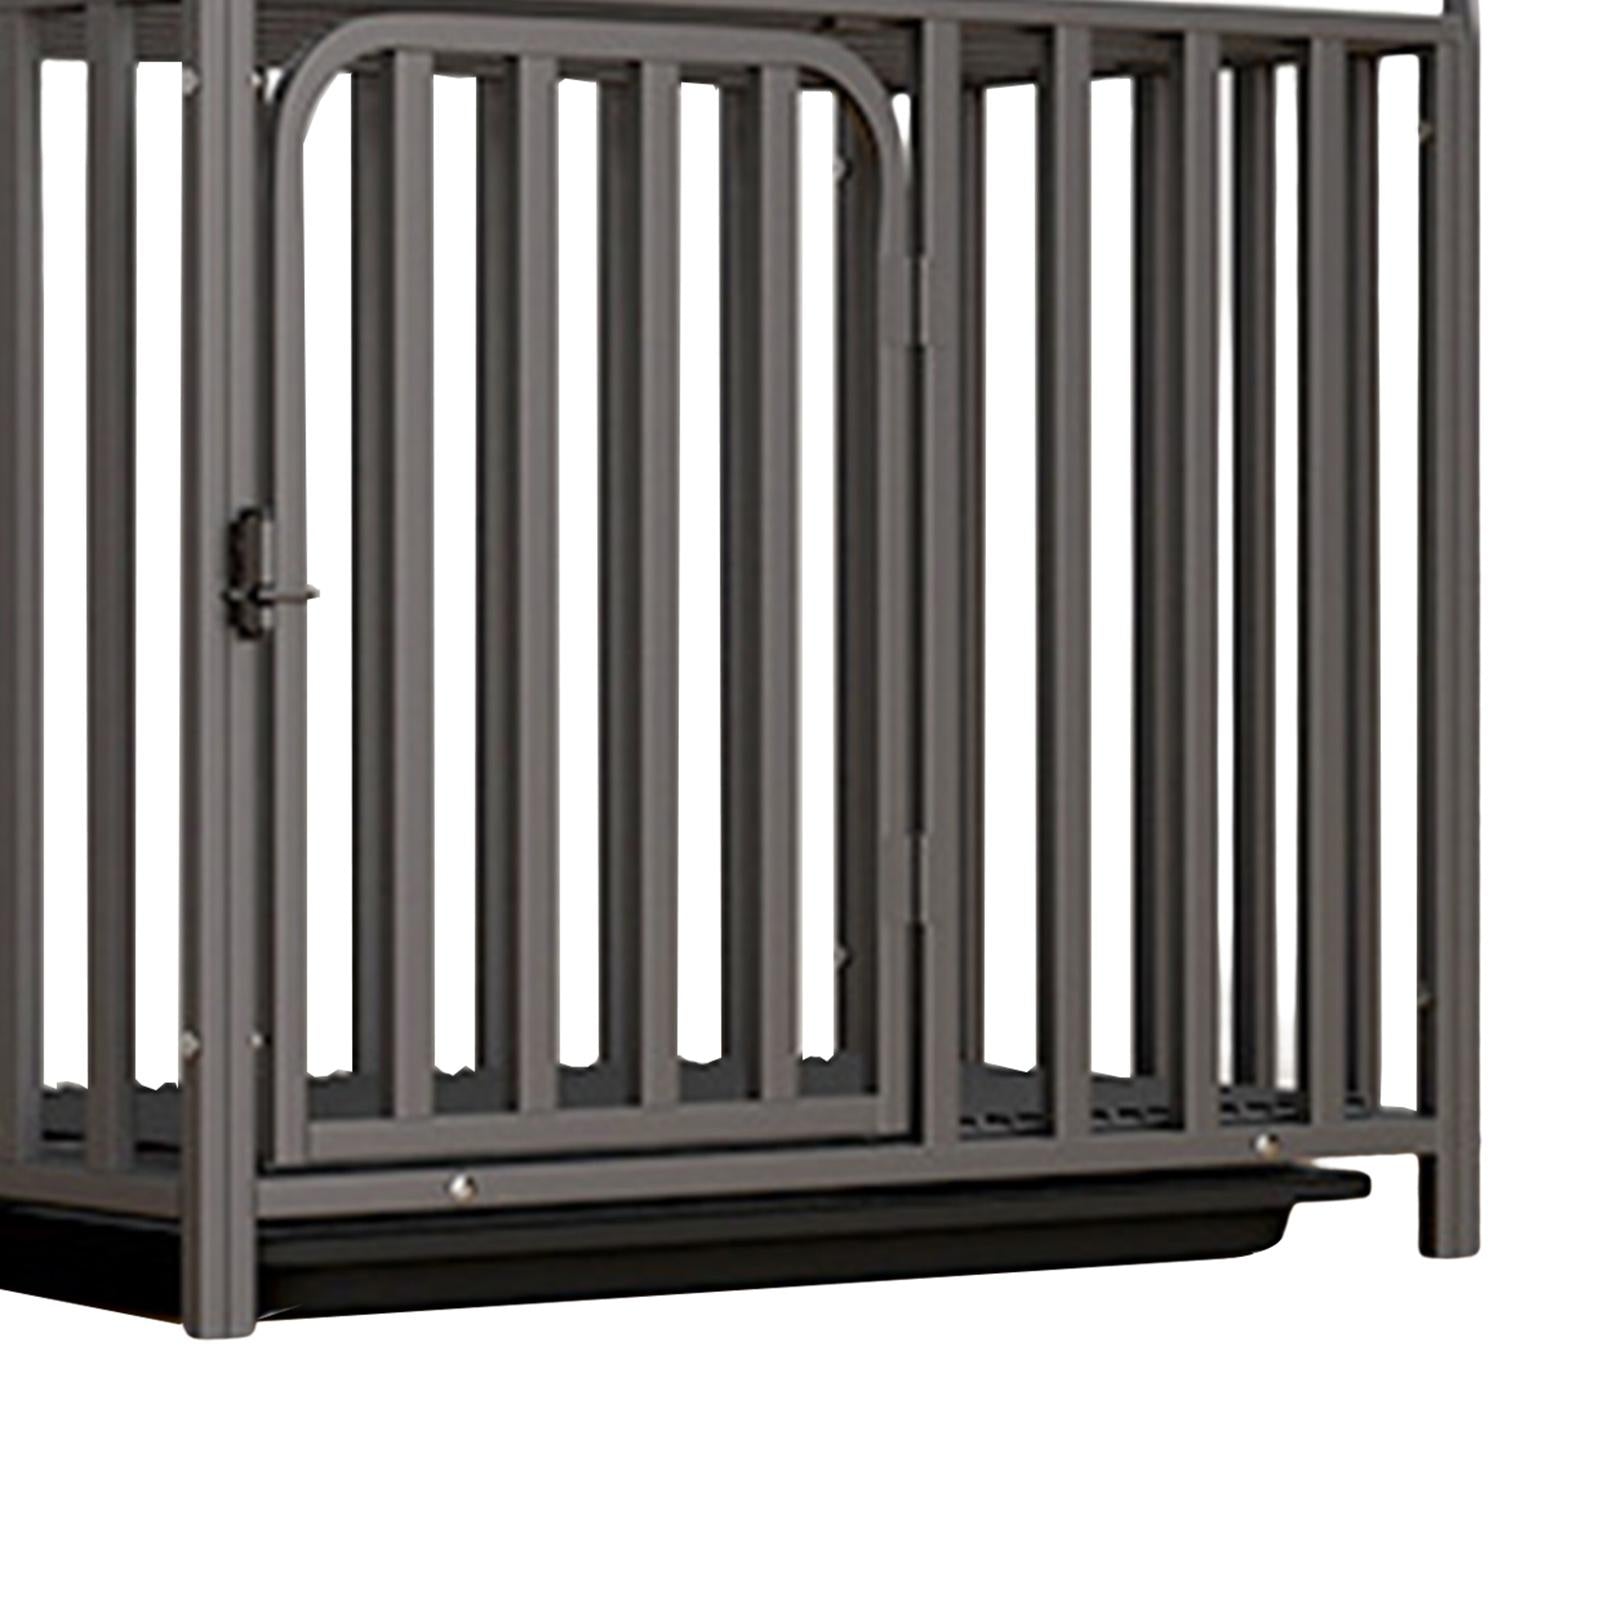 Heavy Duty Dog Crate， Pet Carrier Flat Top Easily to Install with Tray Dogs Kennels Sturdy Black Metal Dog Cage for Indoor Outdoor Small Dog